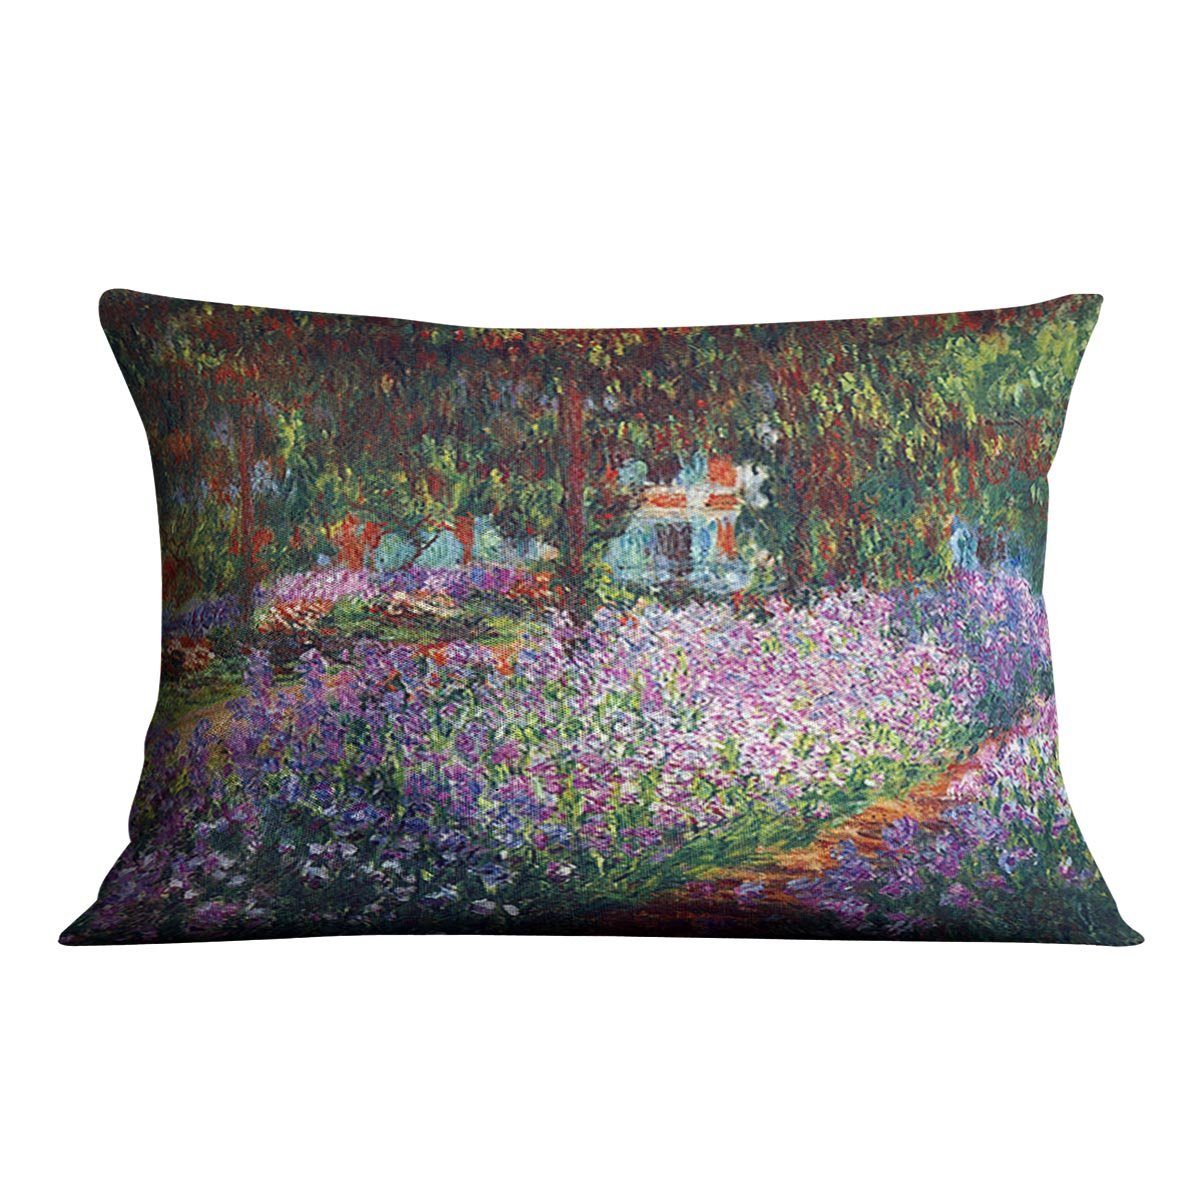 Monet's garden in Giverny by Monet Throw Pillow